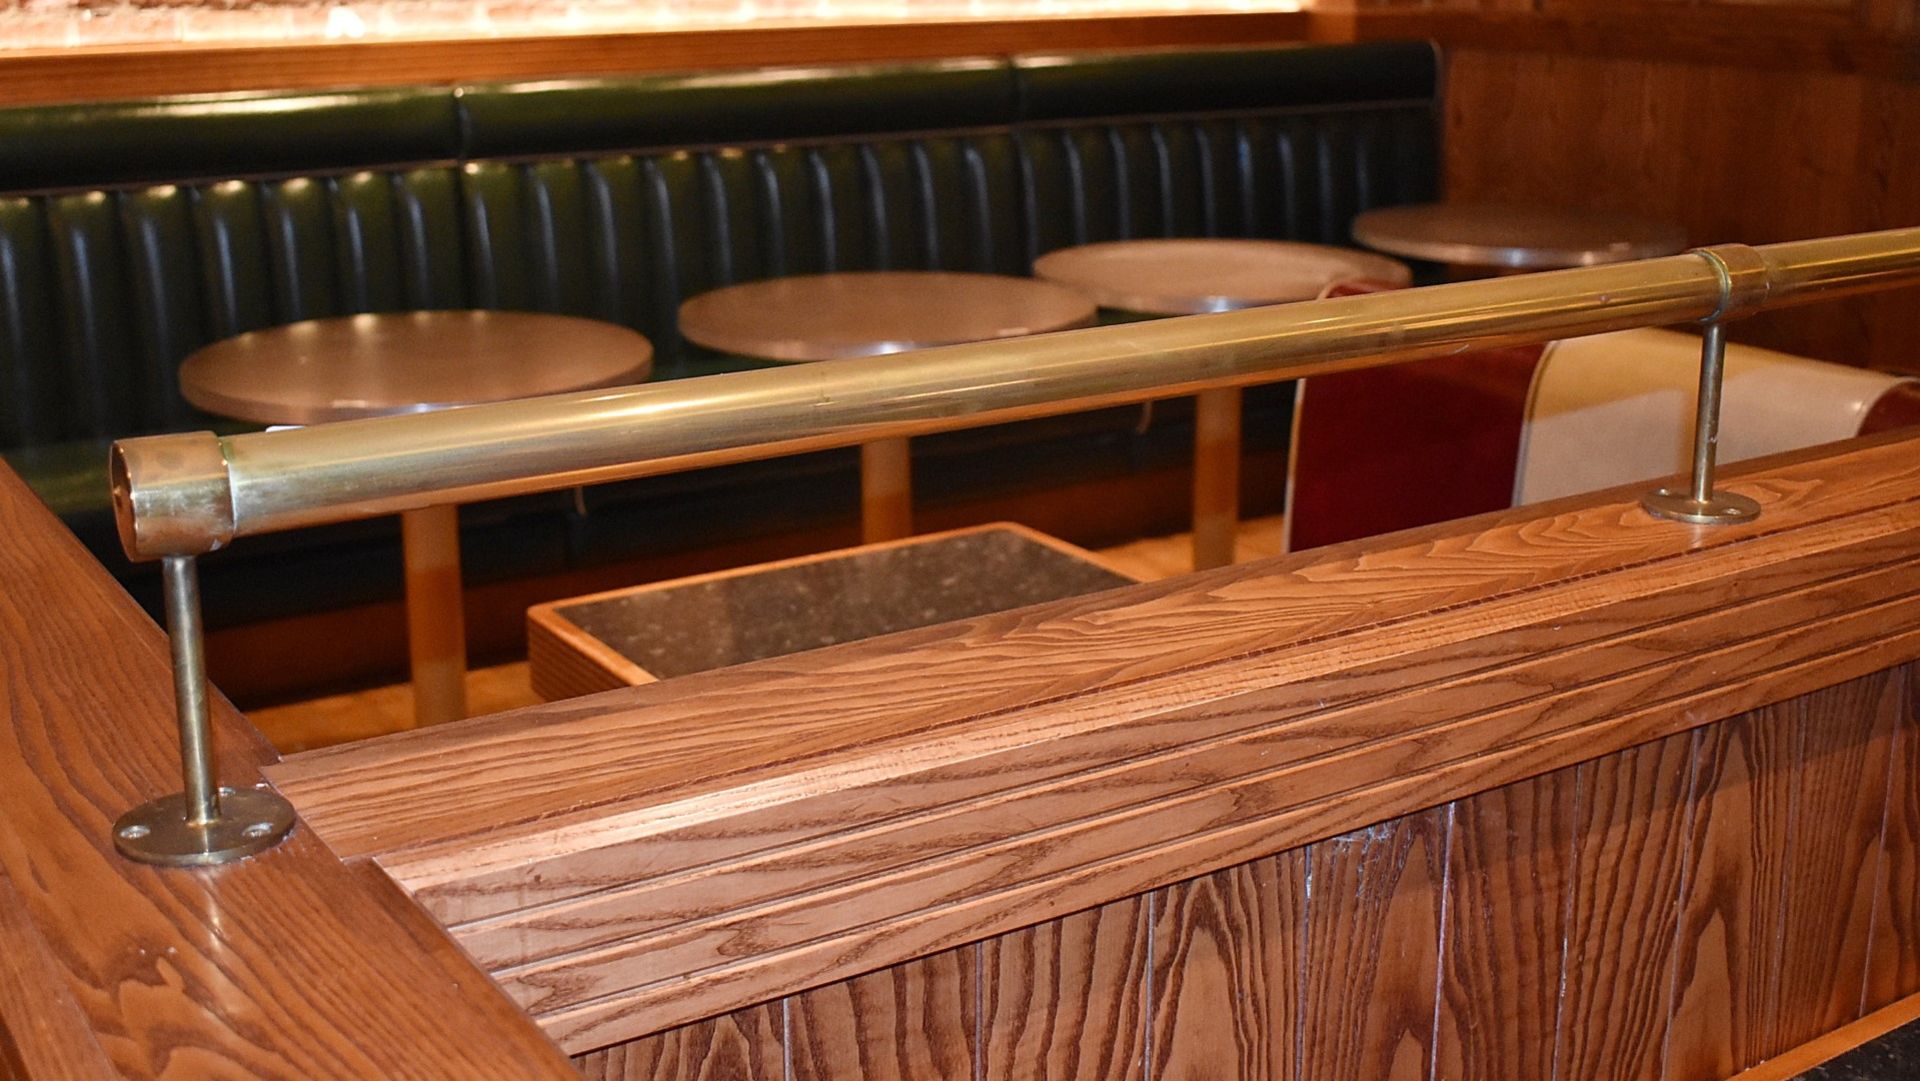 5 x Metres Of Brass Partition Railing, From a Popular Italian-American Diner - Image 3 of 5